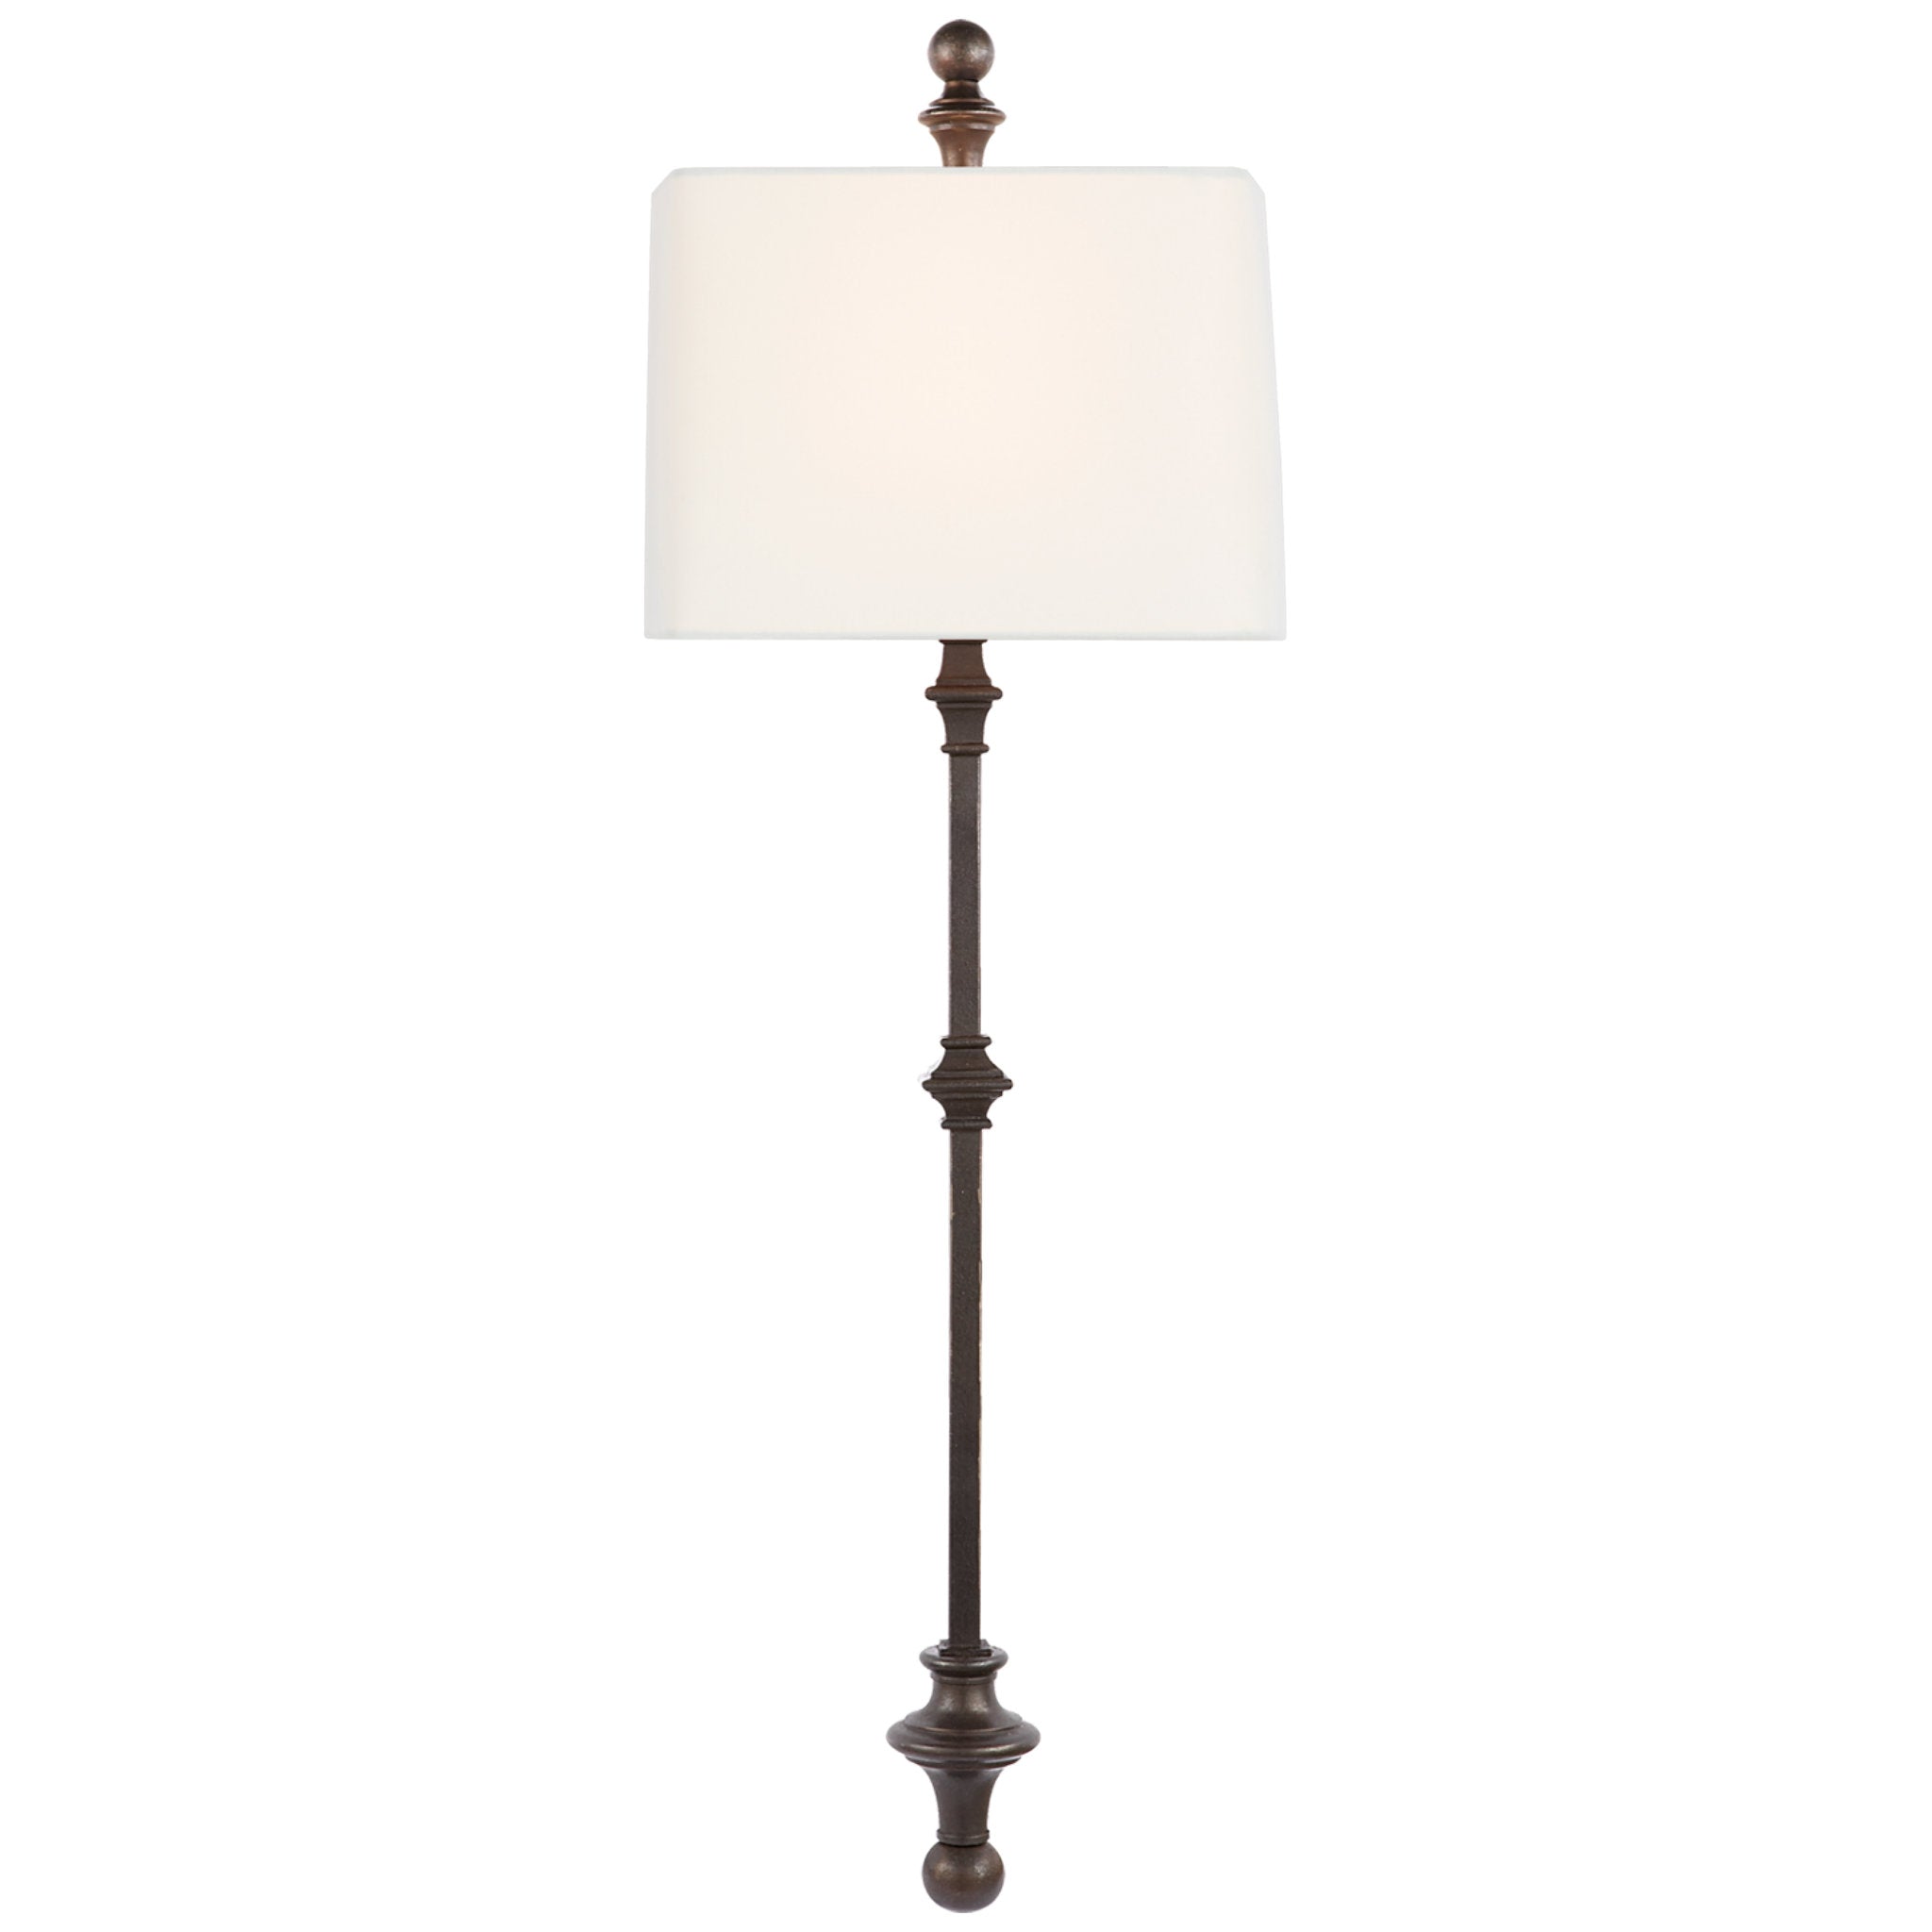 Chapman & Myers Cawdor Stanchion Wall Light in Aged Iron with Linen Shade